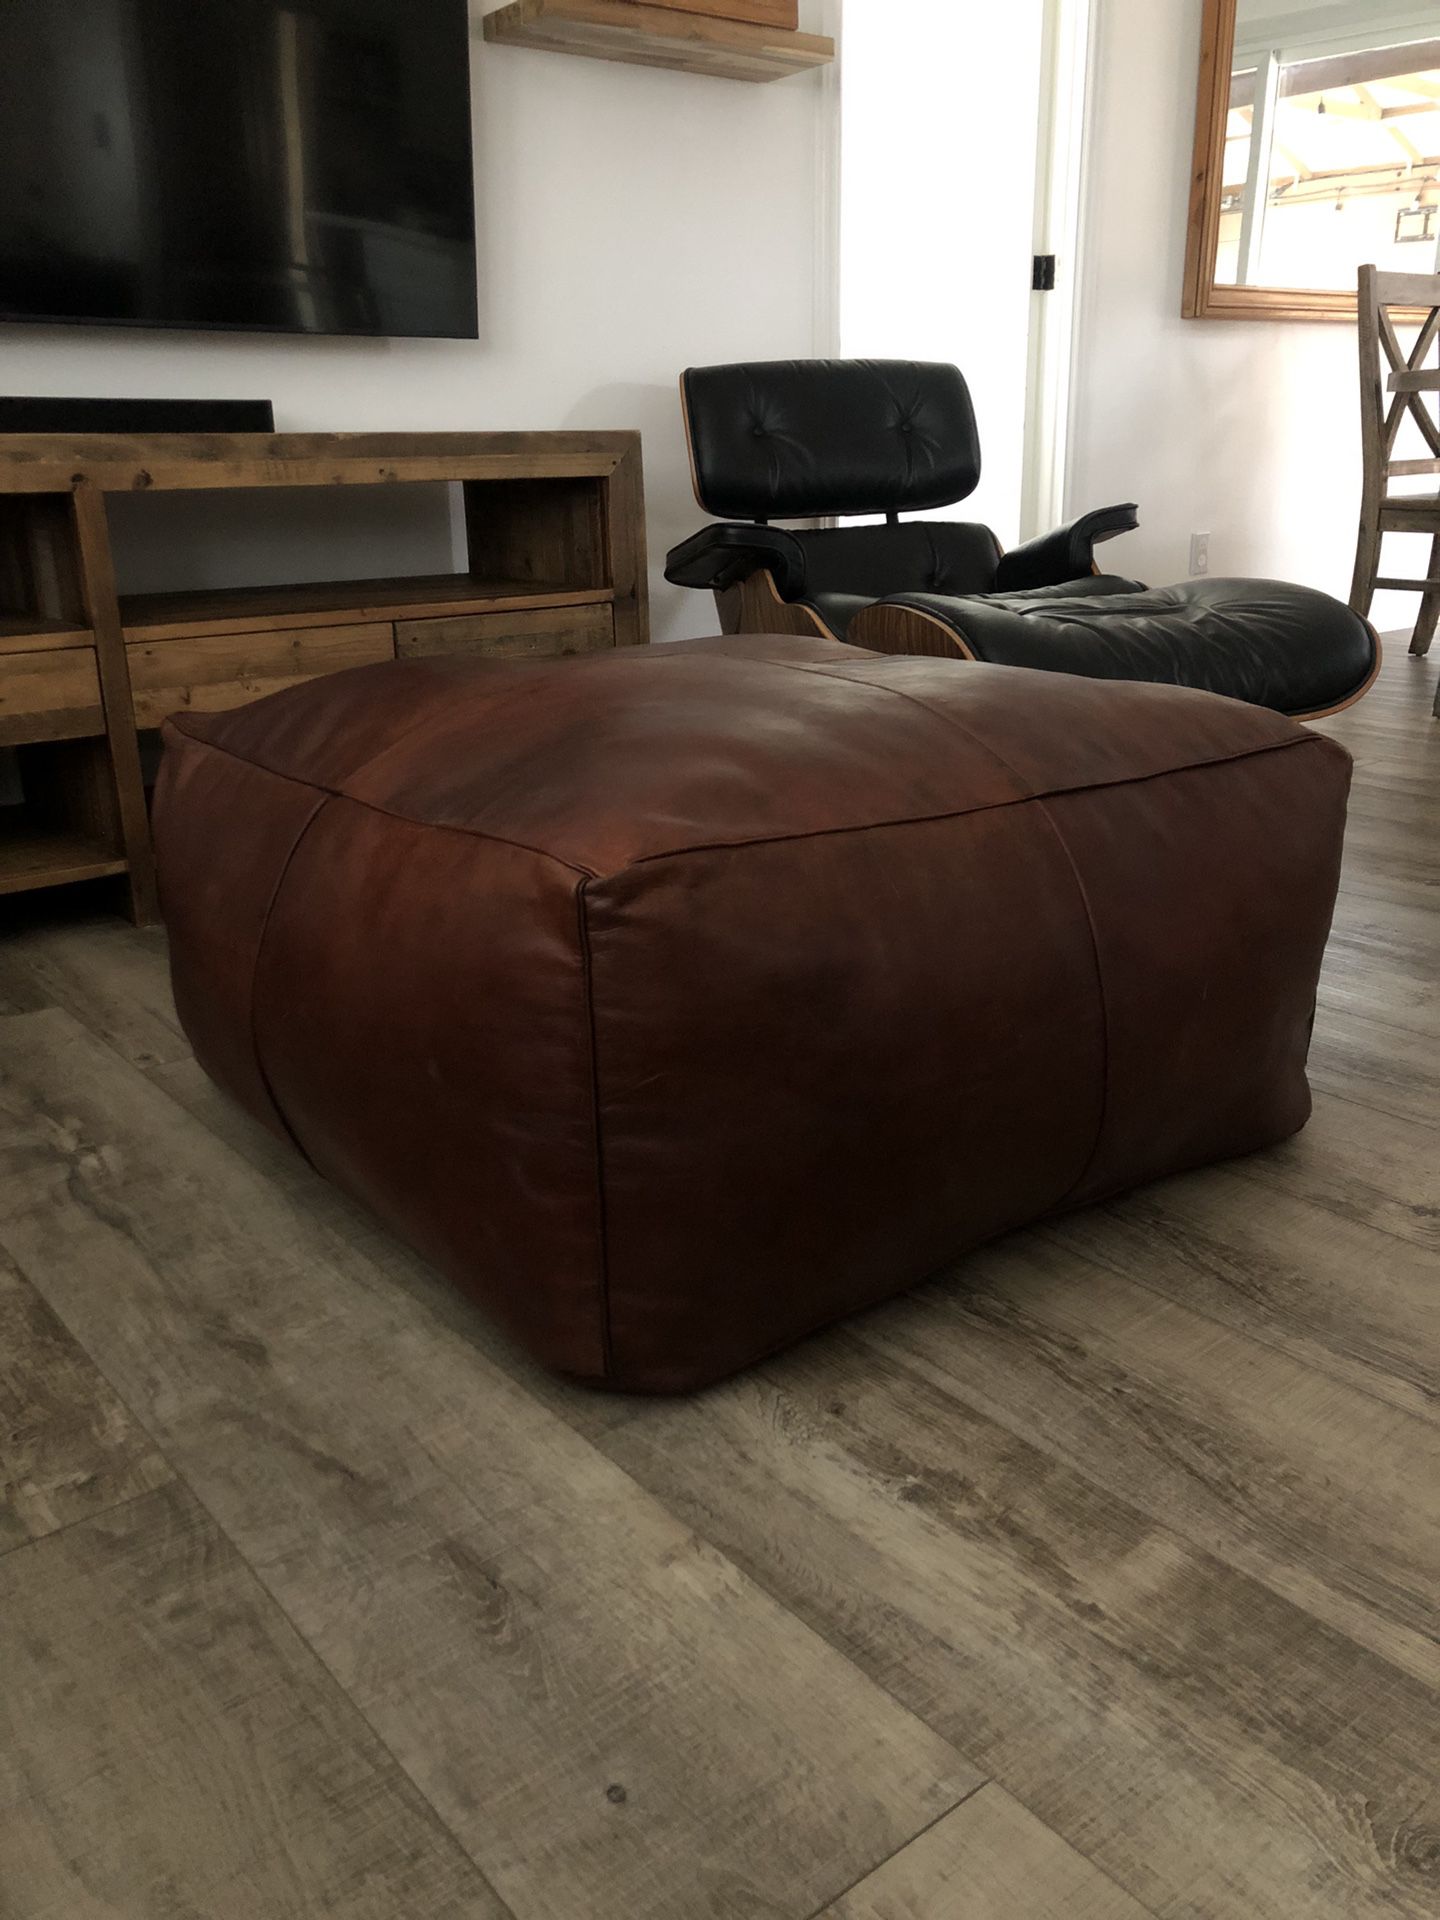 Large Ottoman, Genuine Leather, 36" x 36" x 16".  In Great Condition.